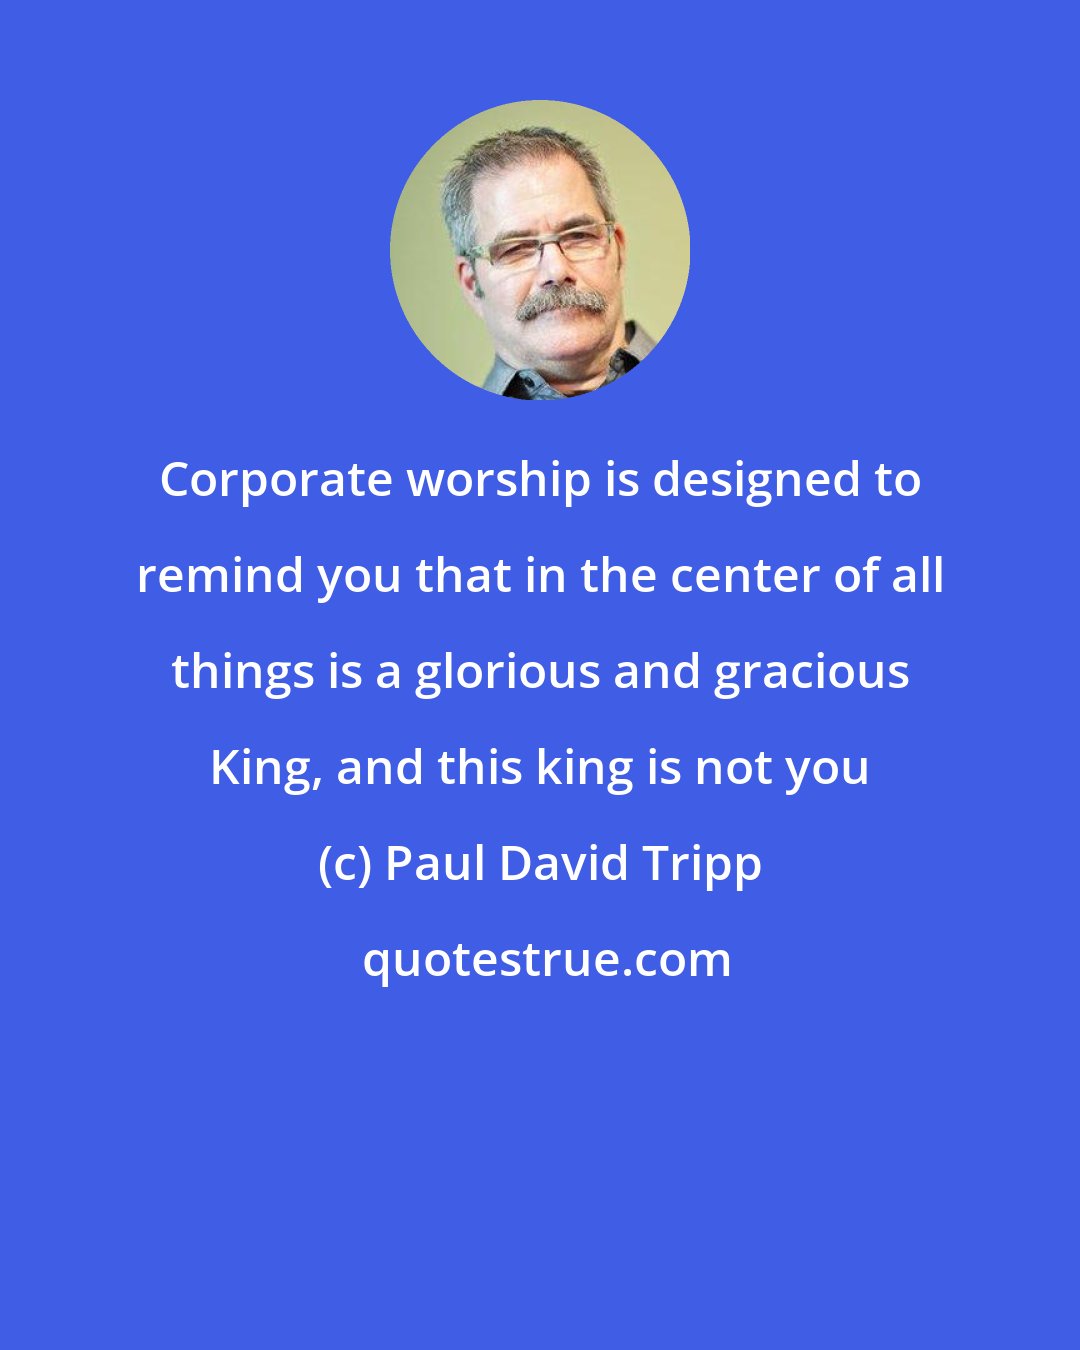 Paul David Tripp: Corporate worship is designed to remind you that in the center of all things is a glorious and gracious King, and this king is not you